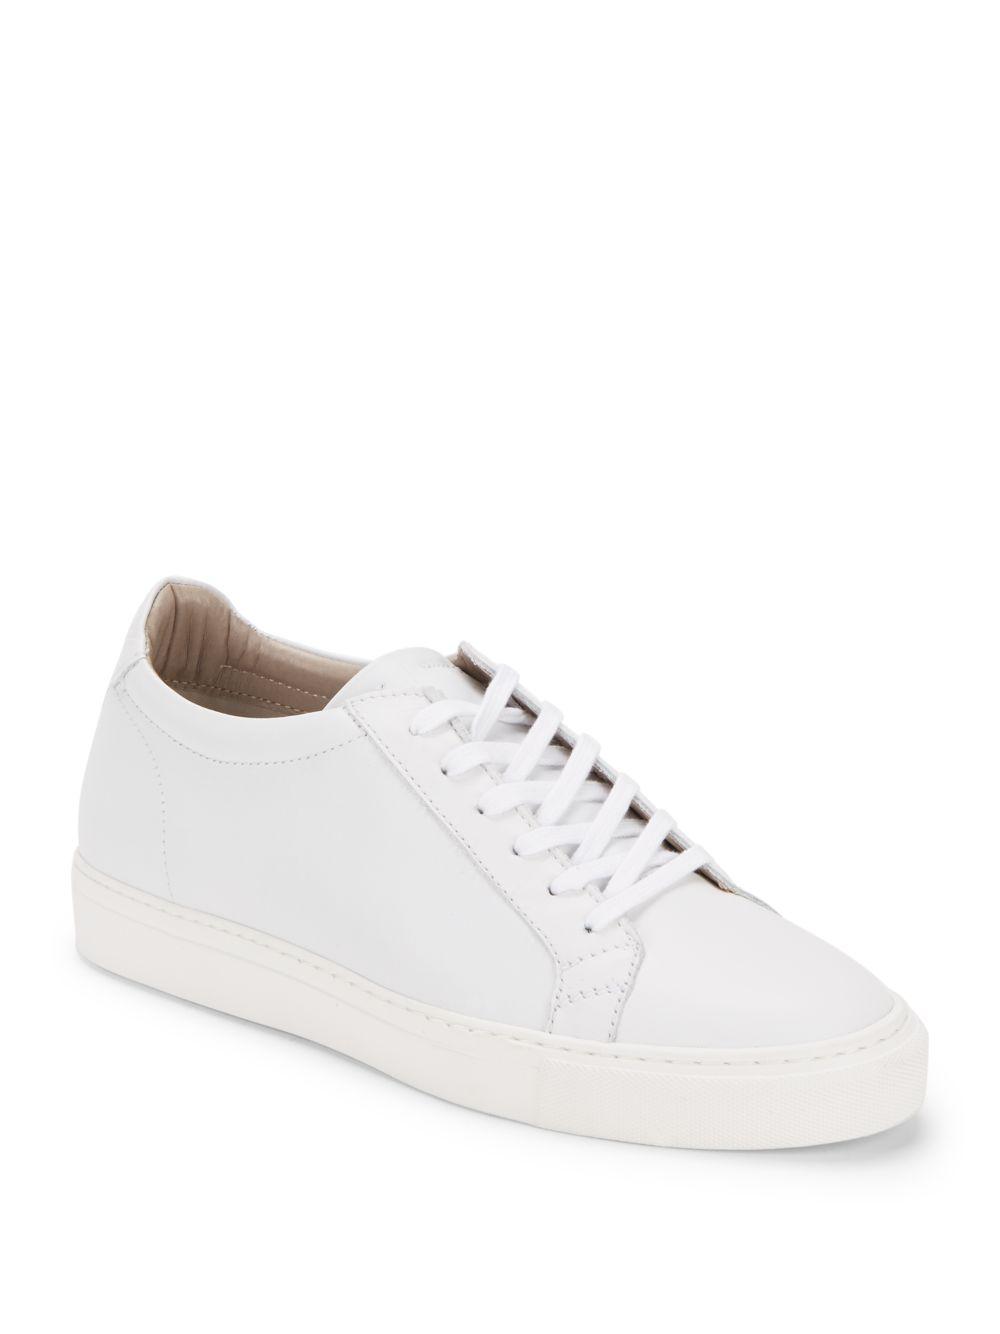 Saks Fifth Avenue Men's Collection Low-top Leather Sneakers - Sesame - Size 8.5 - Fall Sale